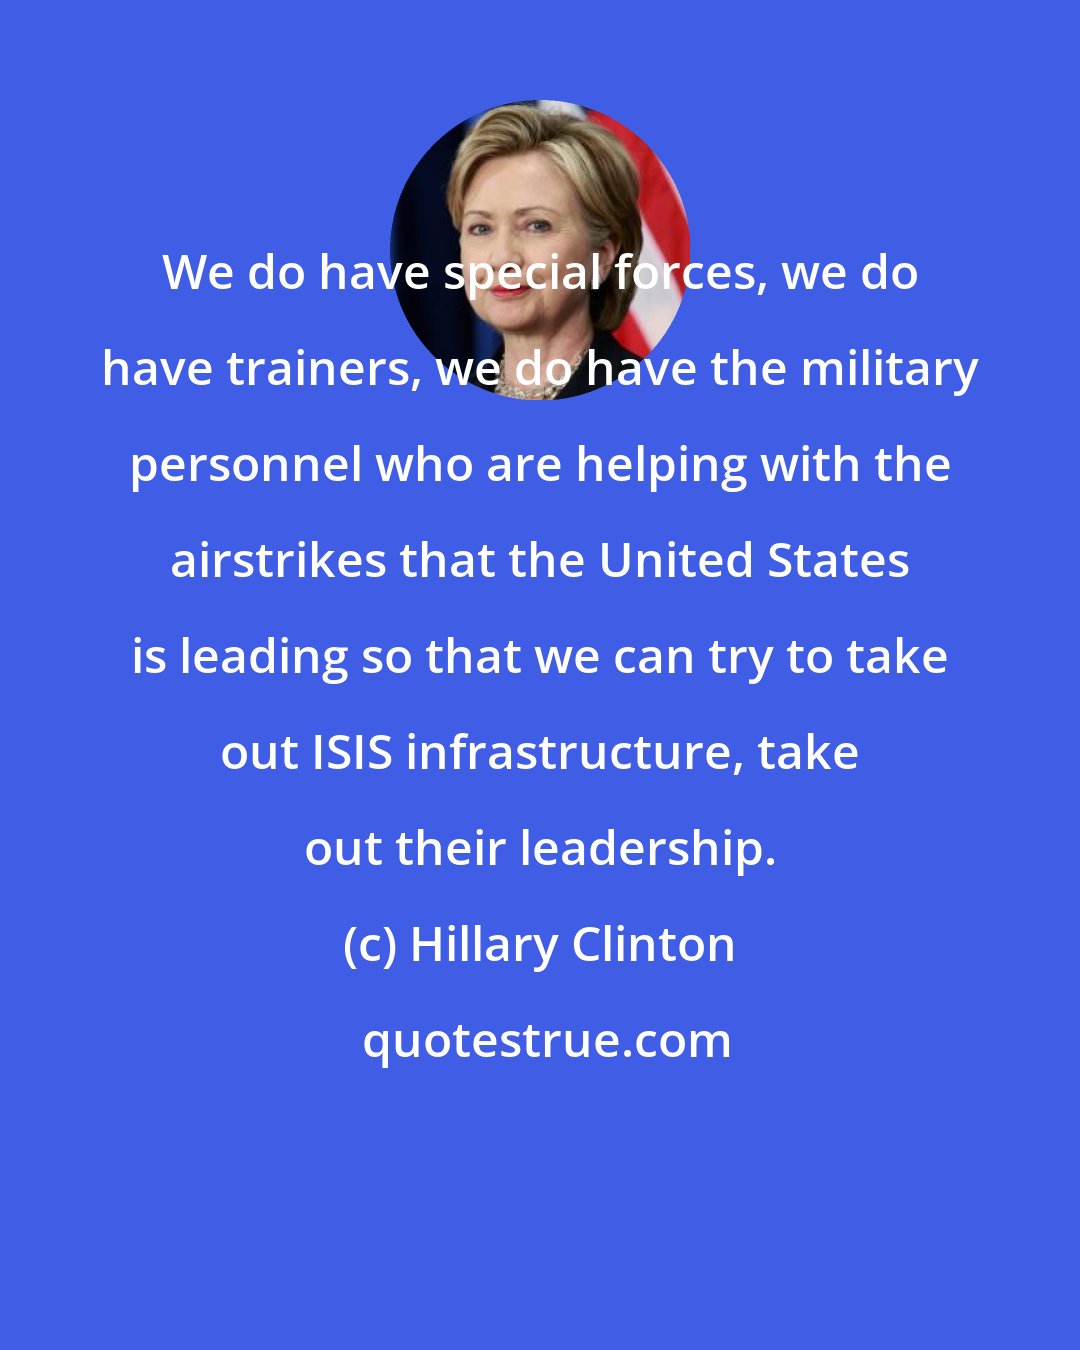 Hillary Clinton: We do have special forces, we do have trainers, we do have the military personnel who are helping with the airstrikes that the United States is leading so that we can try to take out ISIS infrastructure, take out their leadership.